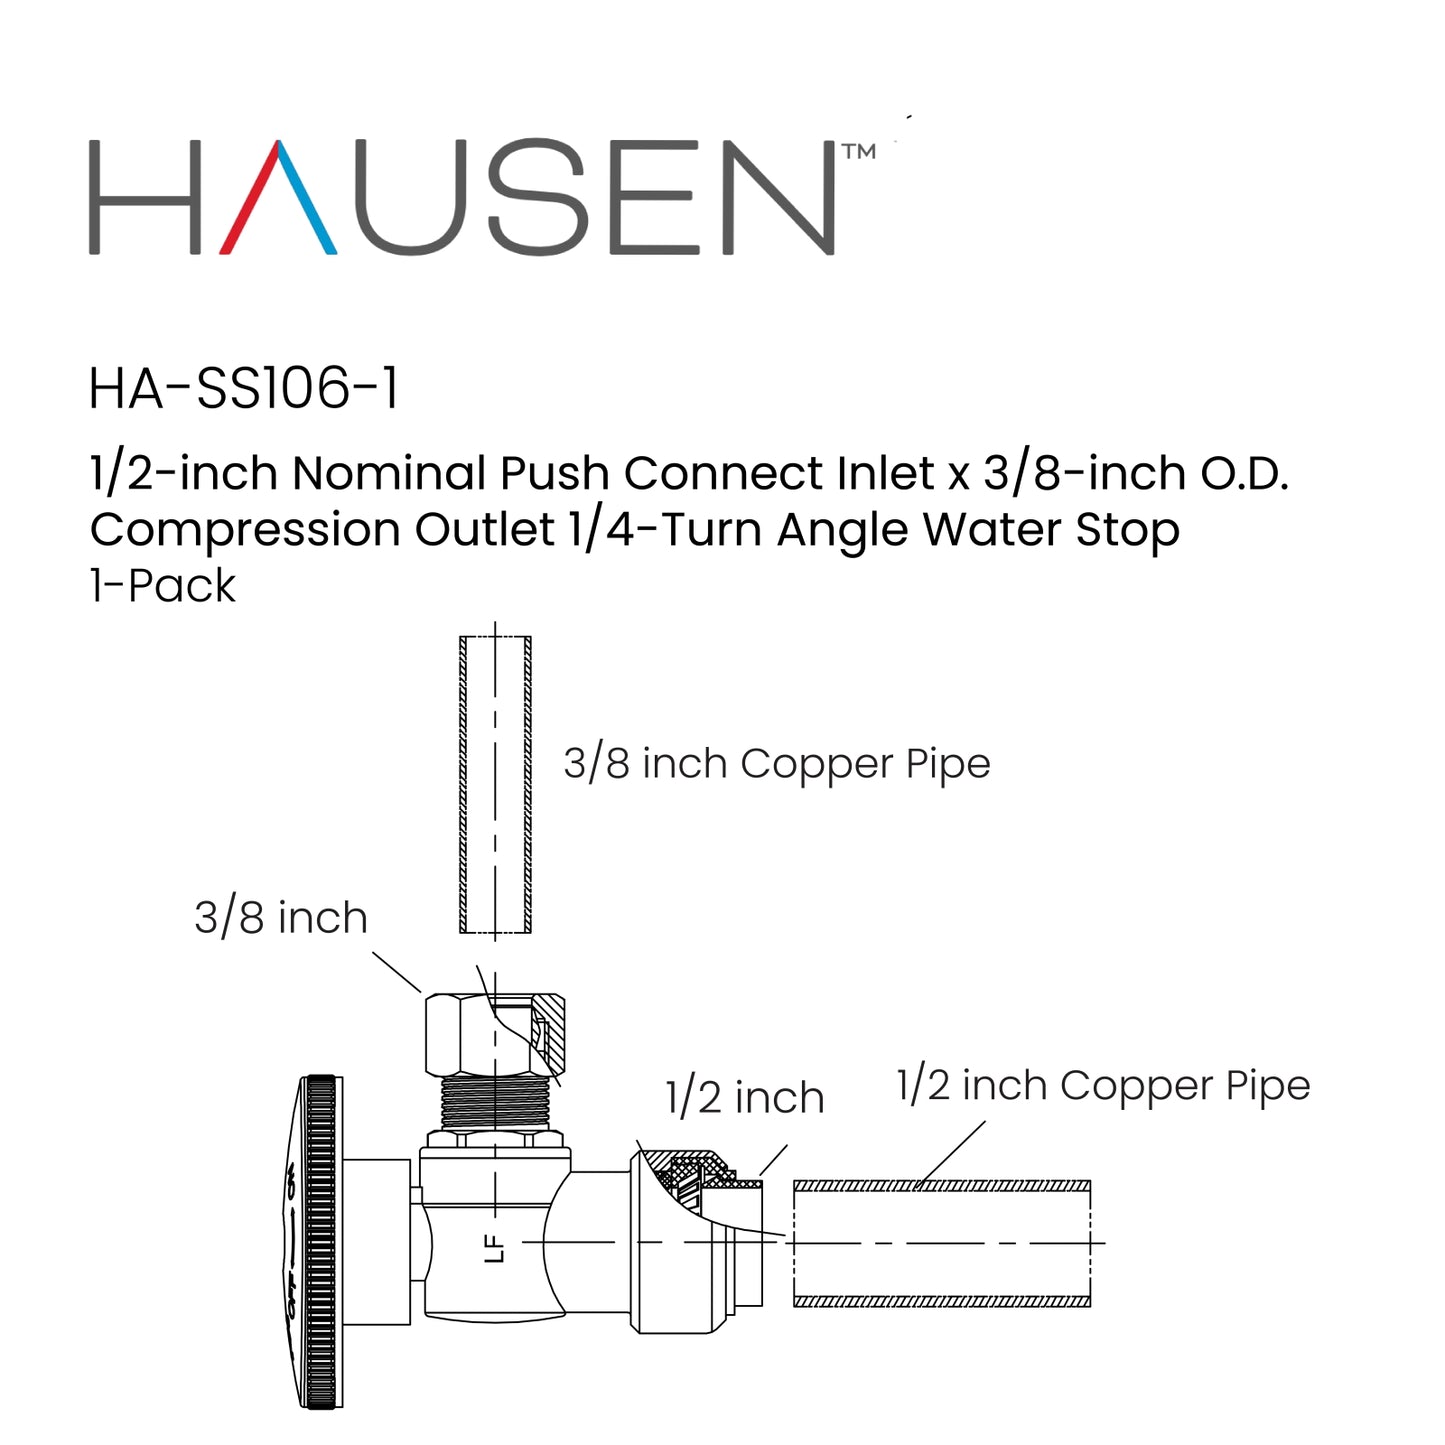 Hausen 1/2-inch Nominal Push Connect Inlet x 3/8-inch O.D. Compression Outlet 1/4-Turn Angle Water Stop, 1-Pack